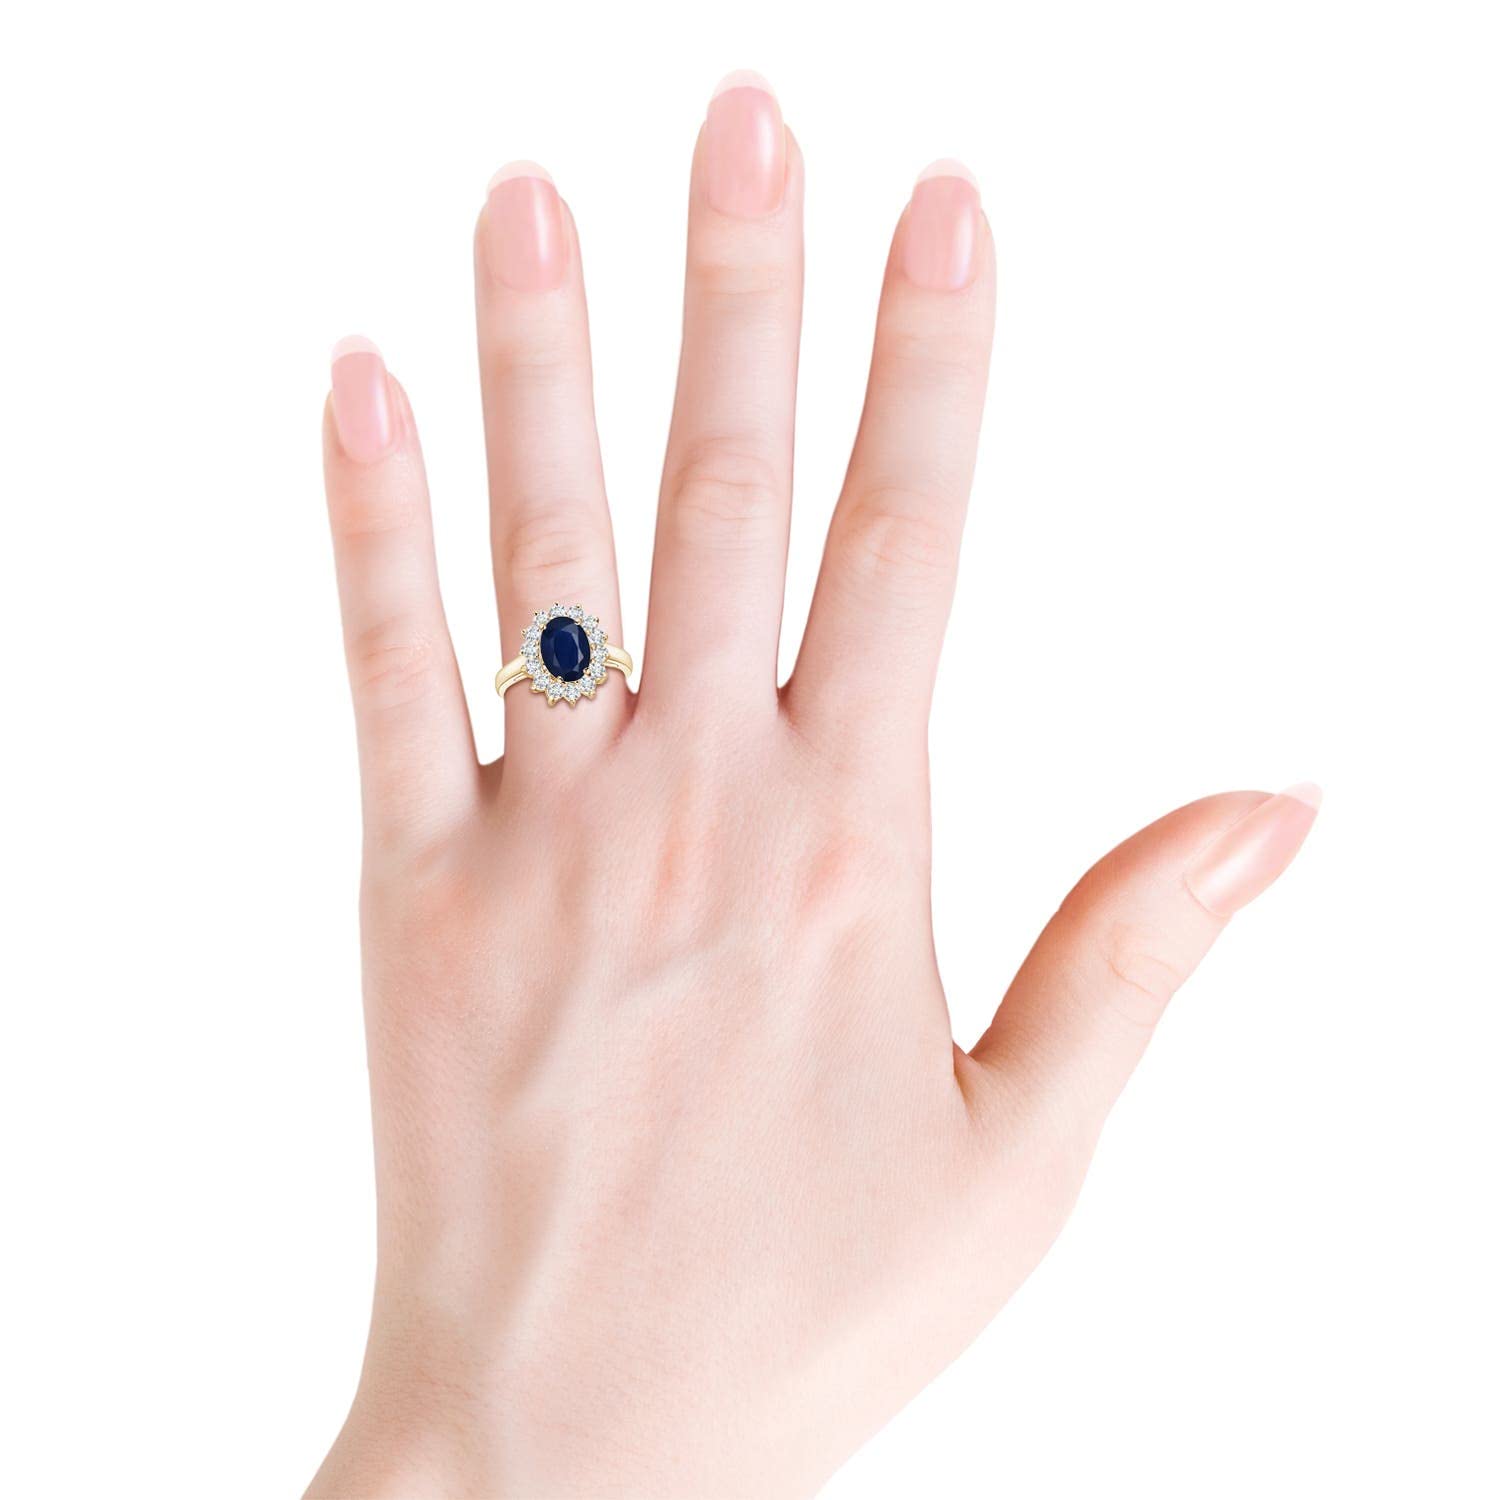 Angara Princess Diana Inspired Natural Blue Sapphire Ring with Diamond Halo (2 cttw Blue Sapphire) Size 3-13